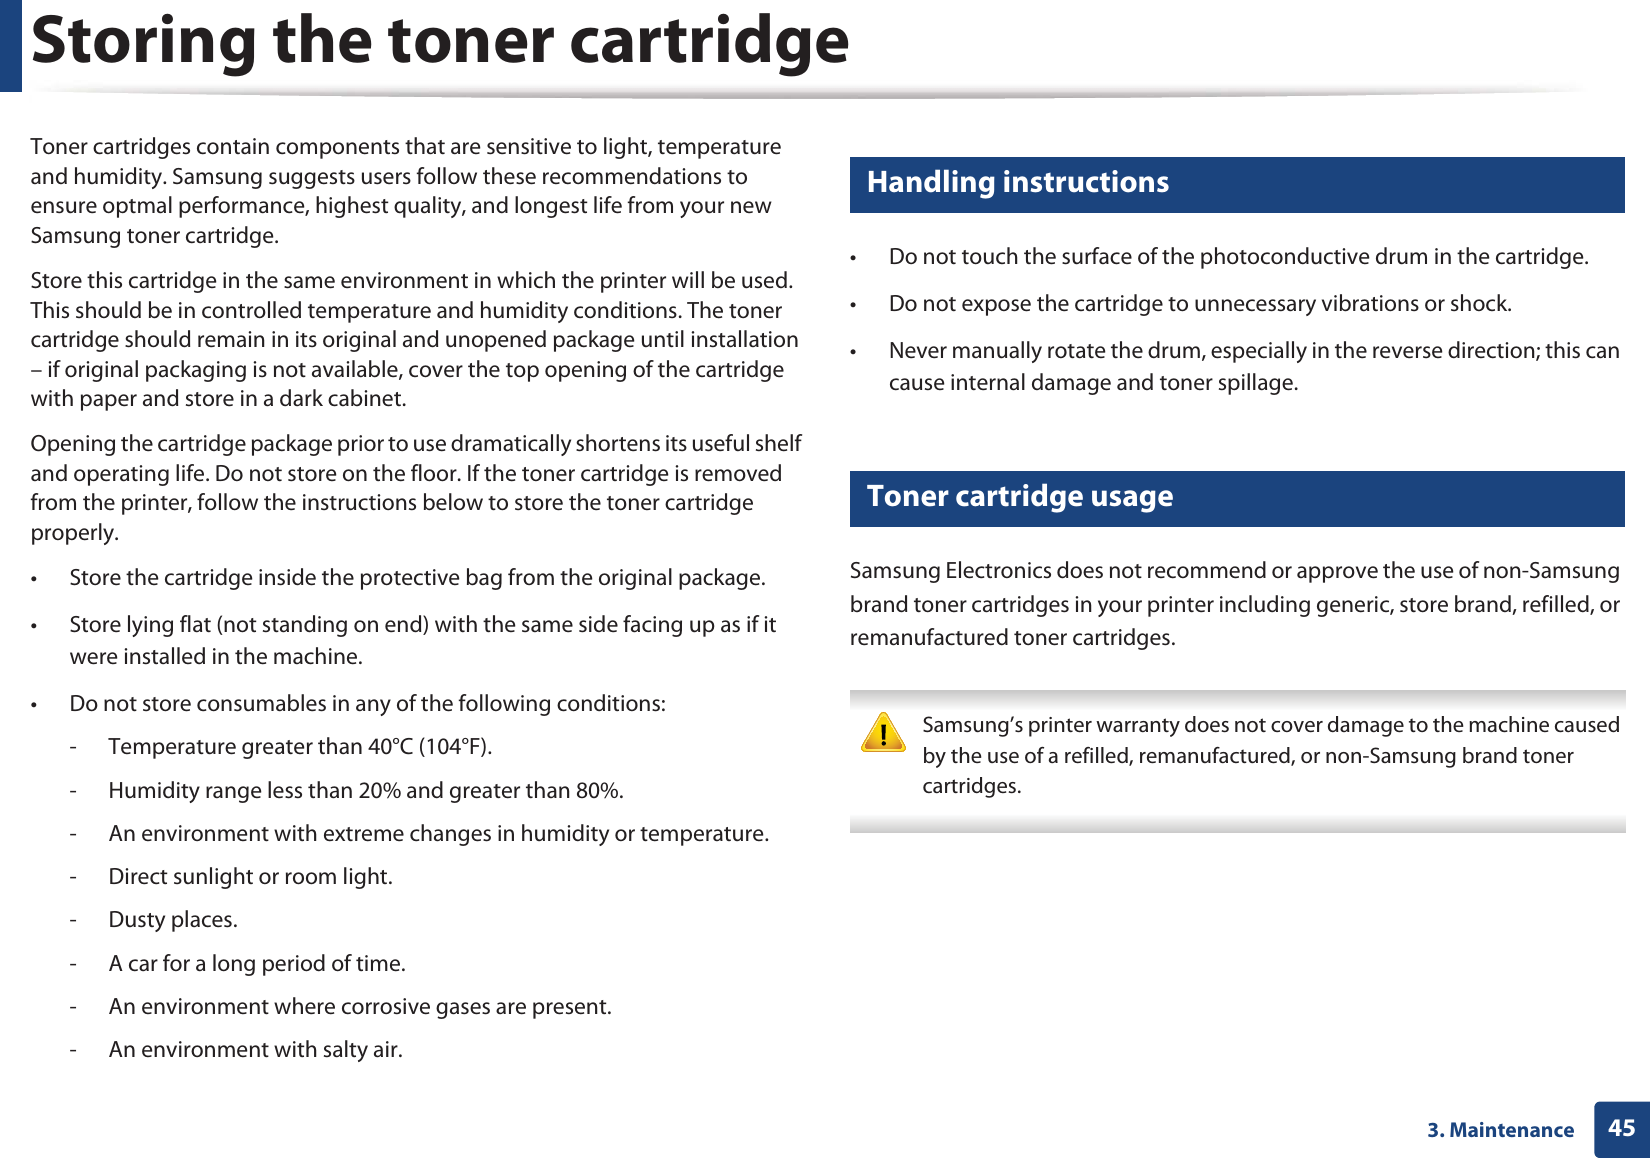 453. MaintenanceStoring the toner cartridgeToner cartridges contain components that are sensitive to light, temperature and humidity. Samsung suggests users follow these recommendations to ensure optmal performance, highest quality, and longest life from your new Samsung toner cartridge.Store this cartridge in the same environment in which the printer will be used. This should be in controlled temperature and humidity conditions. The toner cartridge should remain in its original and unopened package until installation – if original packaging is not available, cover the top opening of the cartridge with paper and store in a dark cabinet.Opening the cartridge package prior to use dramatically shortens its useful shelf and operating life. Do not store on the floor. If the toner cartridge is removed from the printer, follow the instructions below to store the toner cartridge properly.• Store the cartridge inside the protective bag from the original package. • Store lying flat (not standing on end) with the same side facing up as if it were installed in the machine.• Do not store consumables in any of the following conditions:- Temperature greater than 40°C (104°F).- Humidity range less than 20% and greater than 80%.- An environment with extreme changes in humidity or temperature.- Direct sunlight or room light.- Dusty places.- A car for a long period of time.- An environment where corrosive gases are present.- An environment with salty air.1 Handling instructions• Do not touch the surface of the photoconductive drum in the cartridge.• Do not expose the cartridge to unnecessary vibrations or shock.• Never manually rotate the drum, especially in the reverse direction; this can cause internal damage and toner spillage.2 Toner cartridge usageSamsung Electronics does not recommend or approve the use of non-Samsung brand toner cartridges in your printer including generic, store brand, refilled, or remanufactured toner cartridges. Samsung’s printer warranty does not cover damage to the machine caused by the use of a refilled, remanufactured, or non-Samsung brand toner cartridges. 